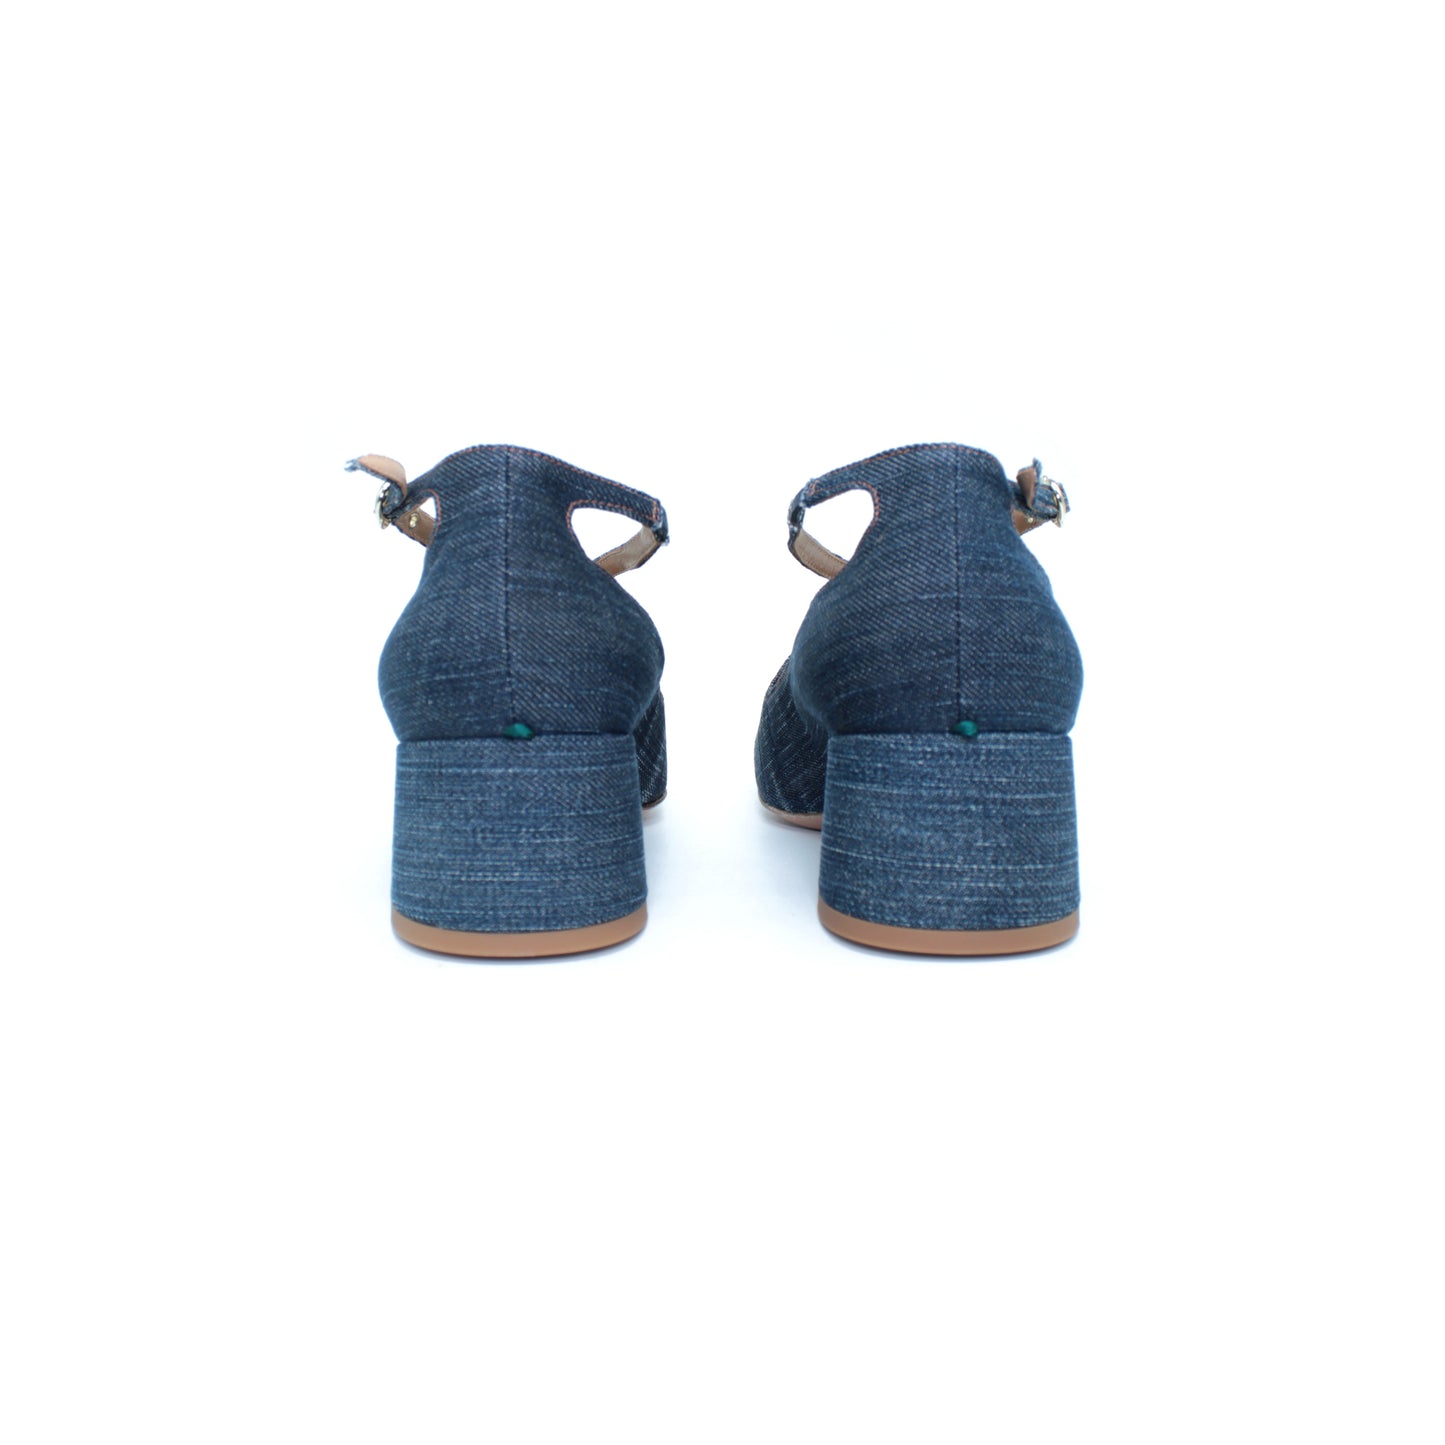 Pump Two for Love in recycled denim 04 - EXCLUSIVE ONLINE